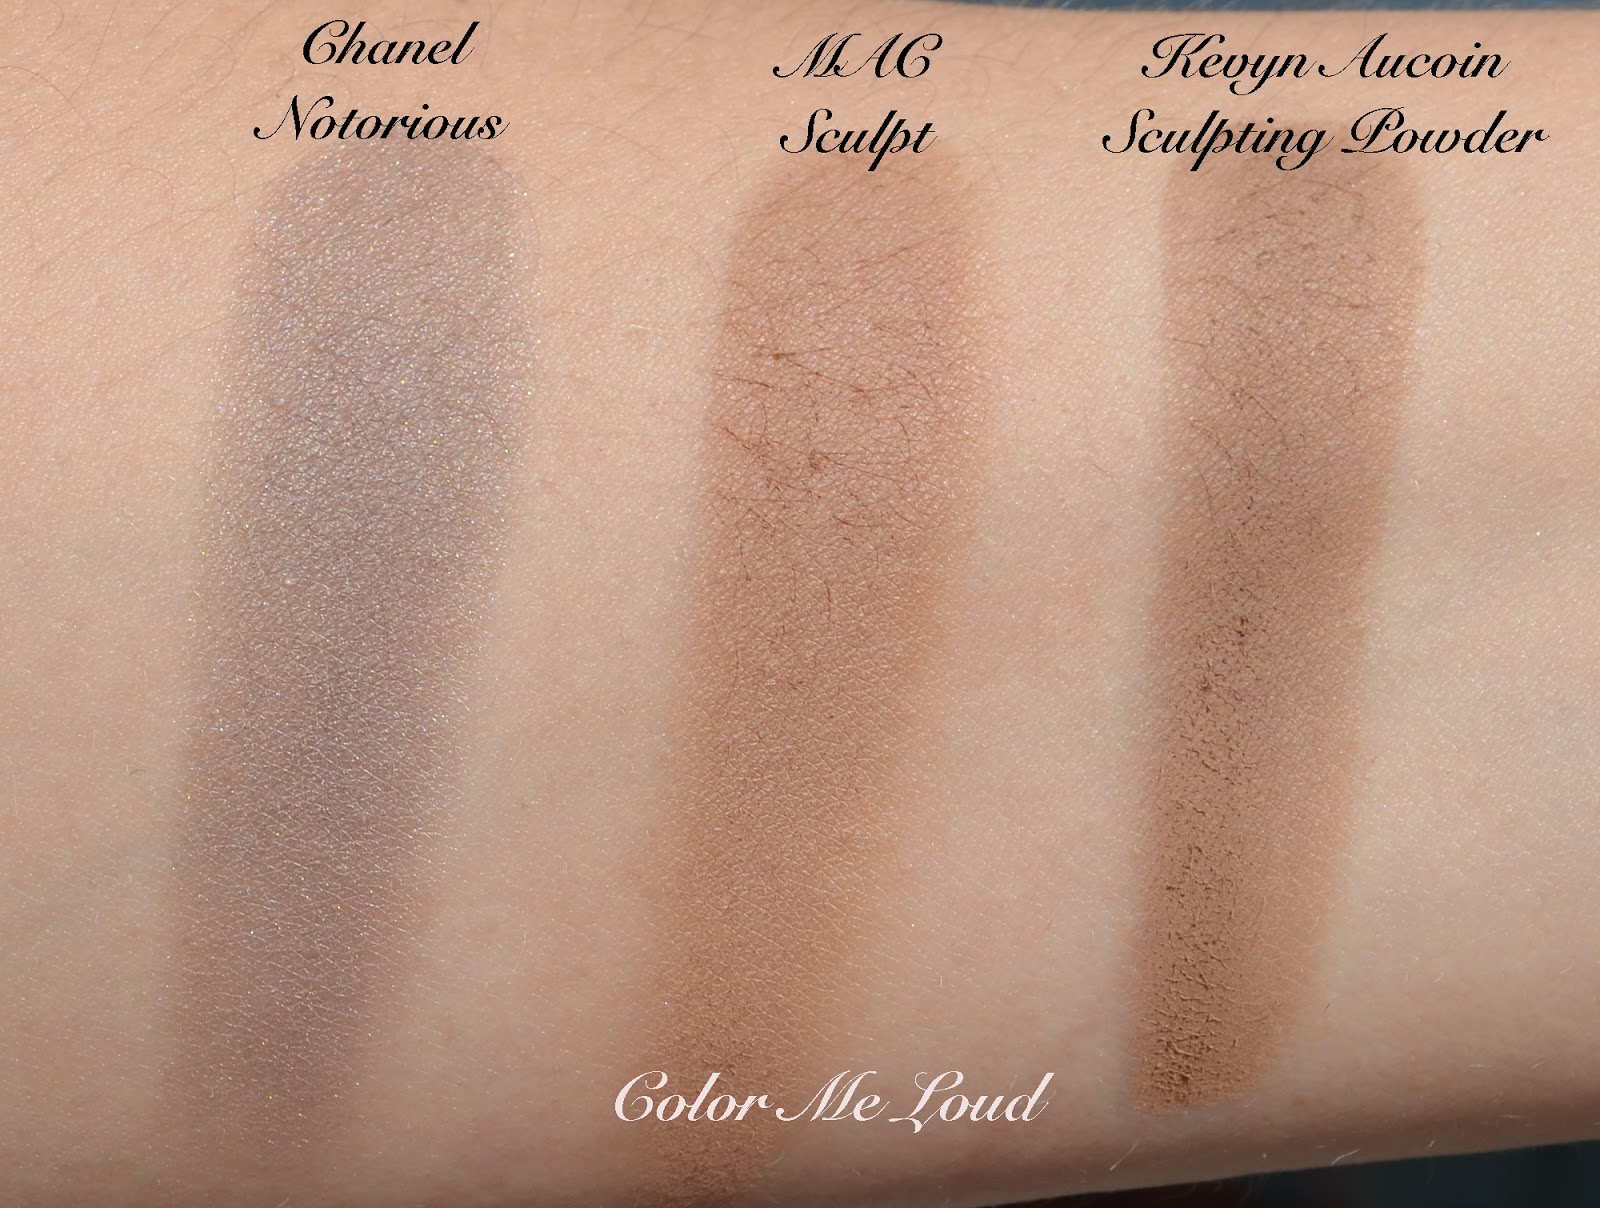 MAC Sculpting Powder in Sculpt from Maleficent Collection, Review, Swatch &  Comparison